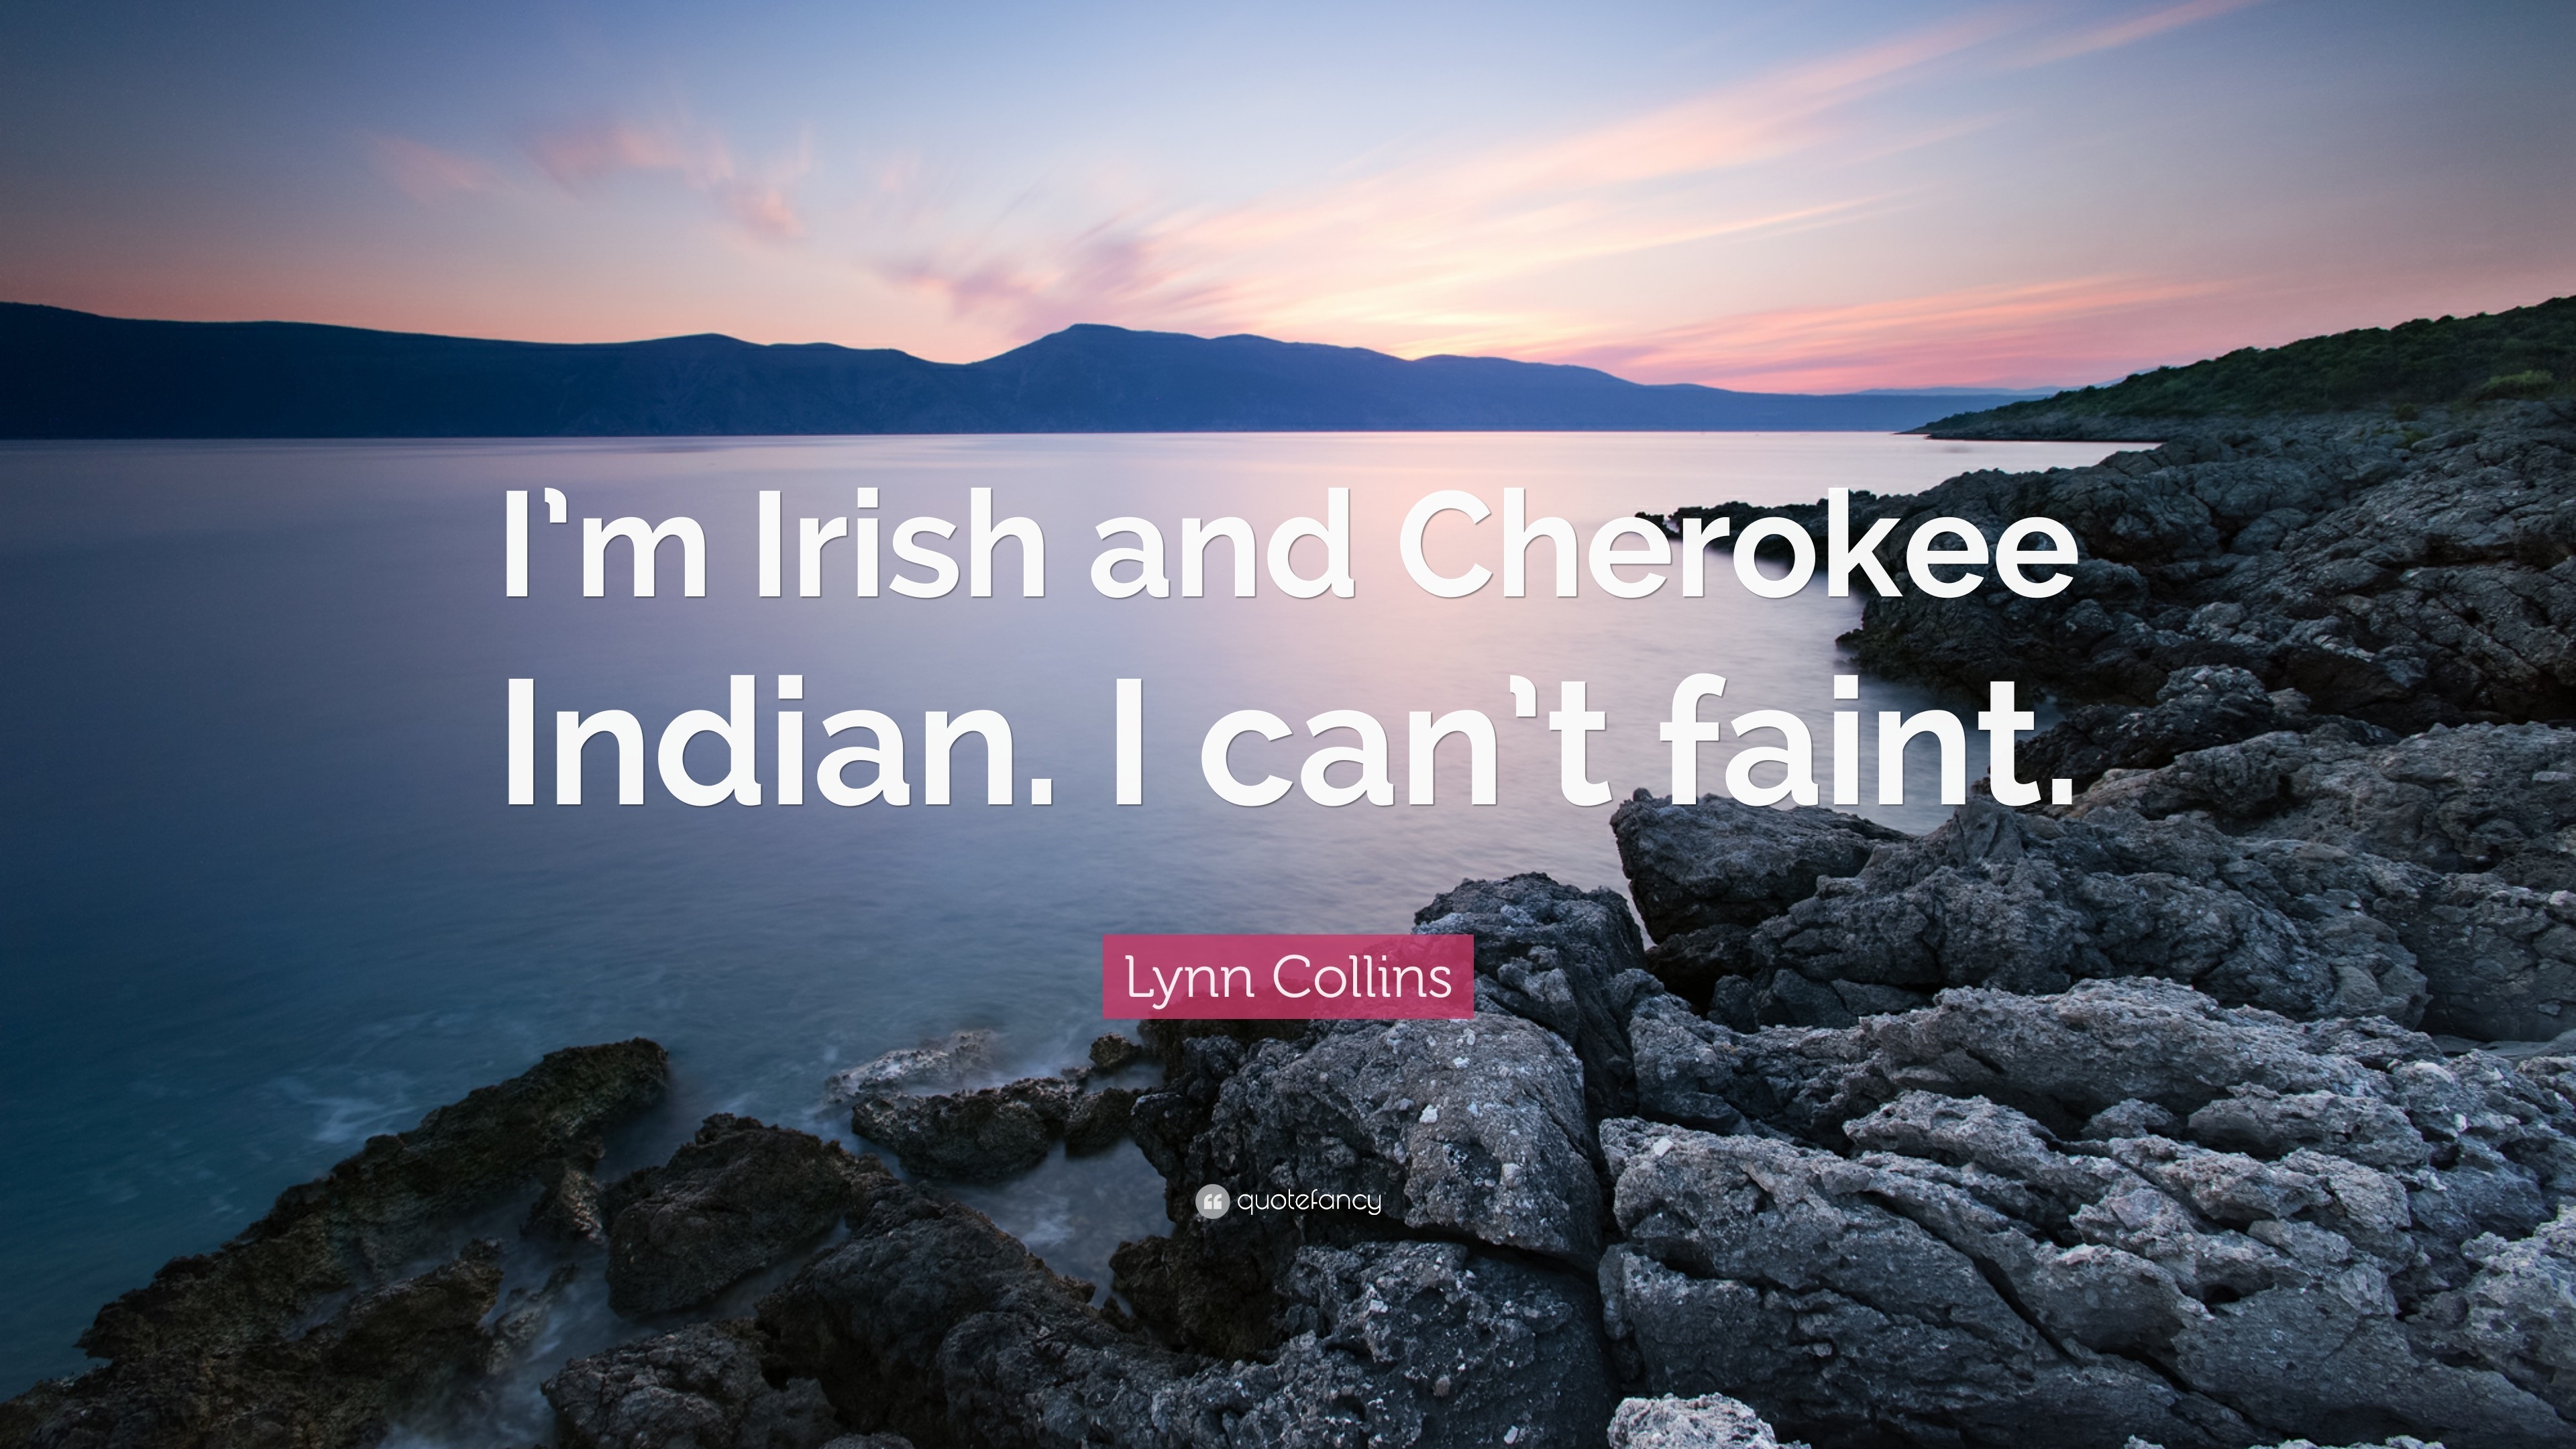 3840x2160  Lynn Collins Quote: “I'm Irish and Cherokee Indian.